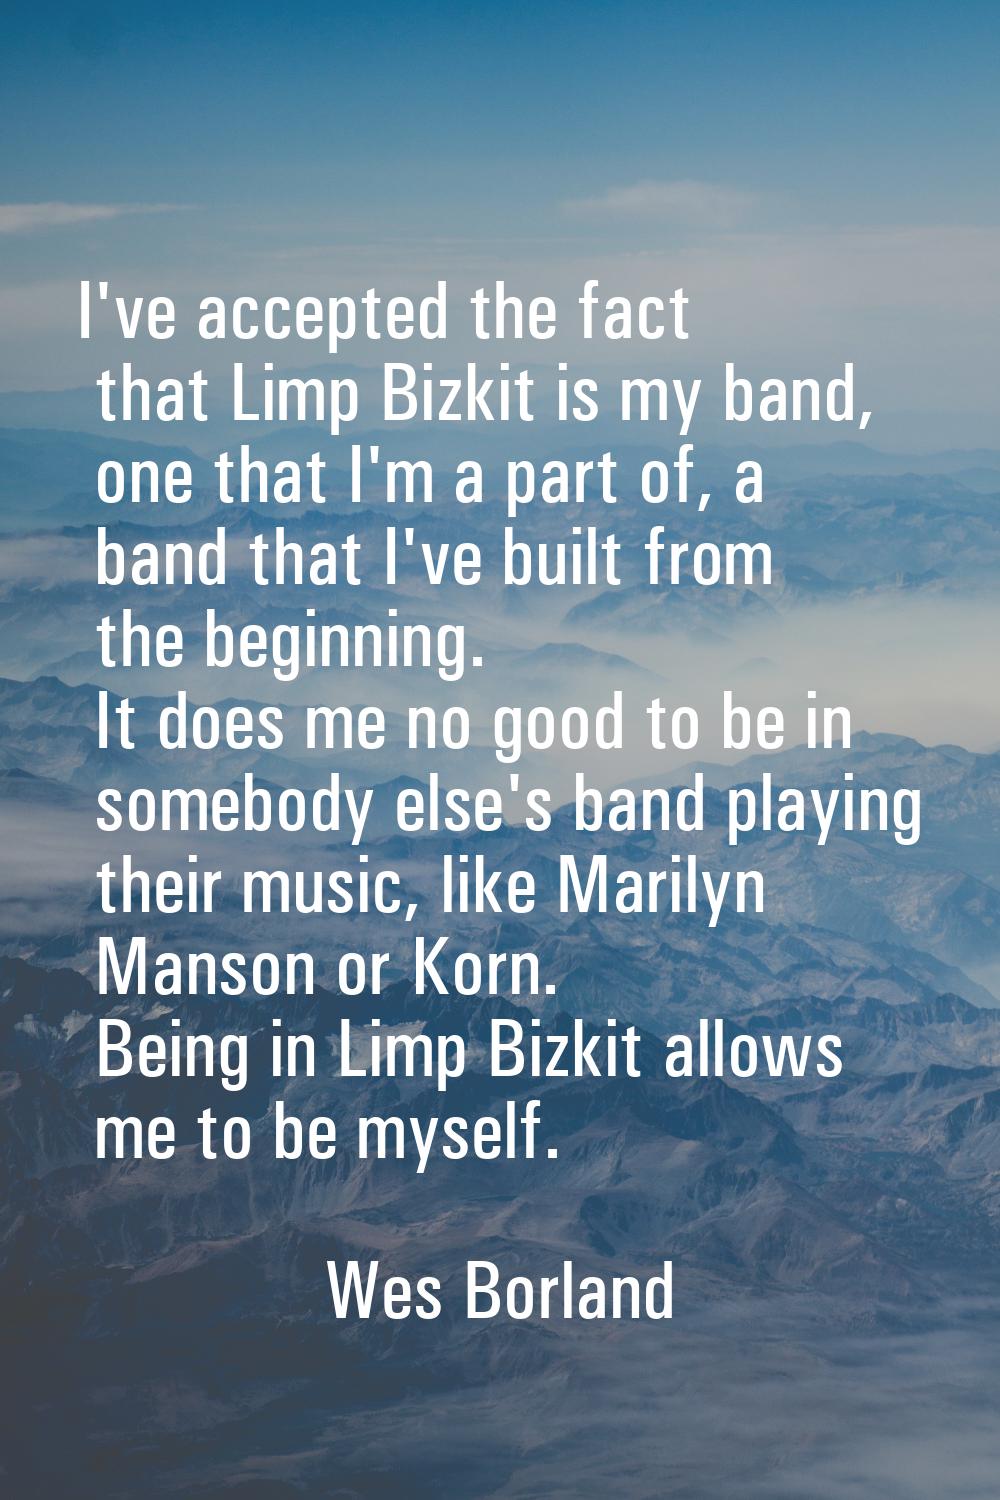 I've accepted the fact that Limp Bizkit is my band, one that I'm a part of, a band that I've built 